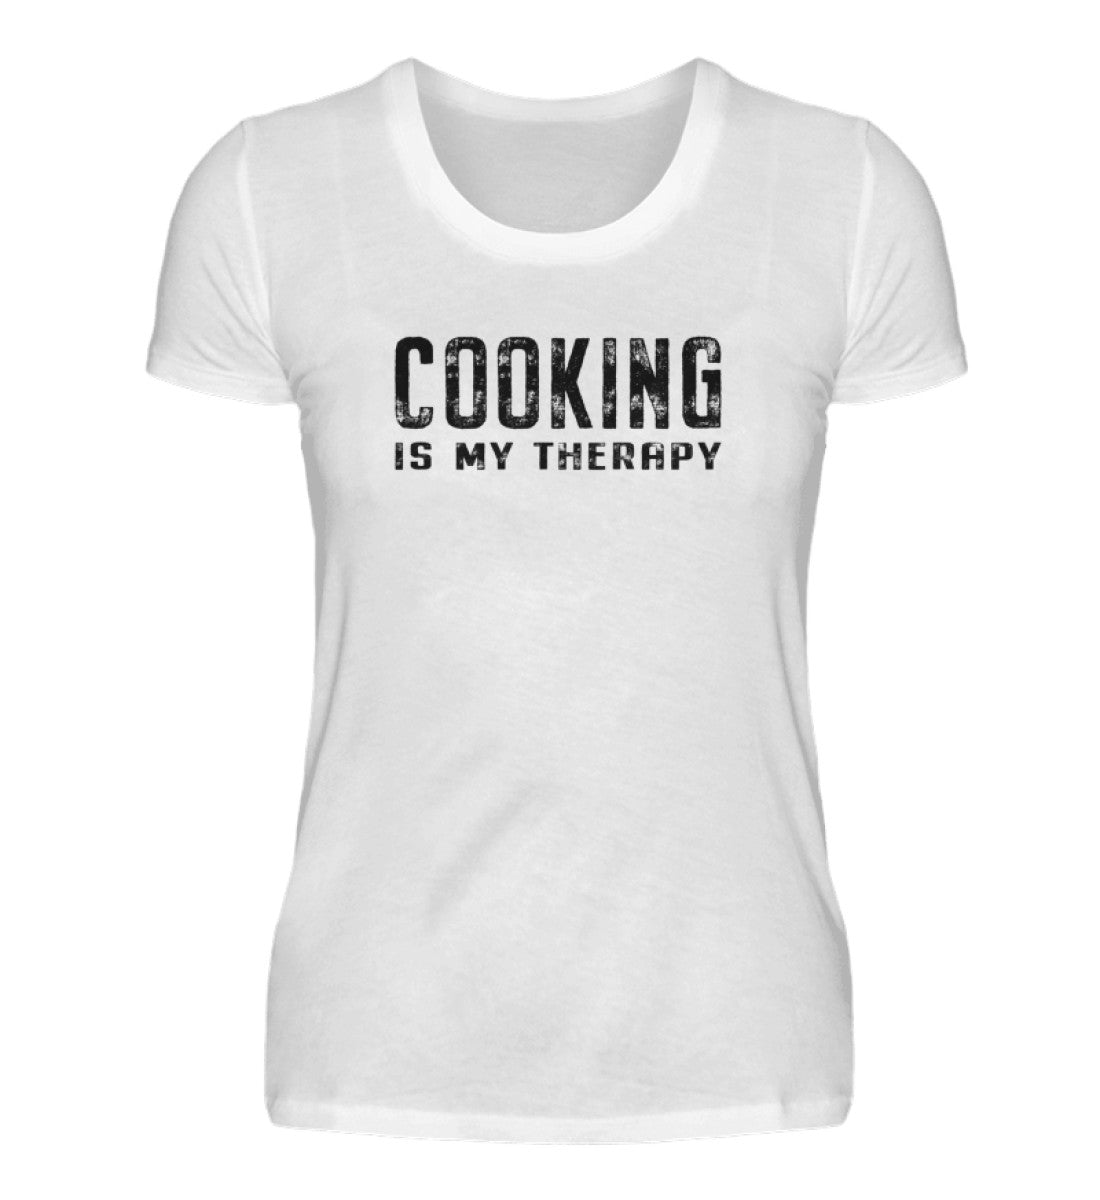 Cooking is my therapy  - Damen Premiumshirt